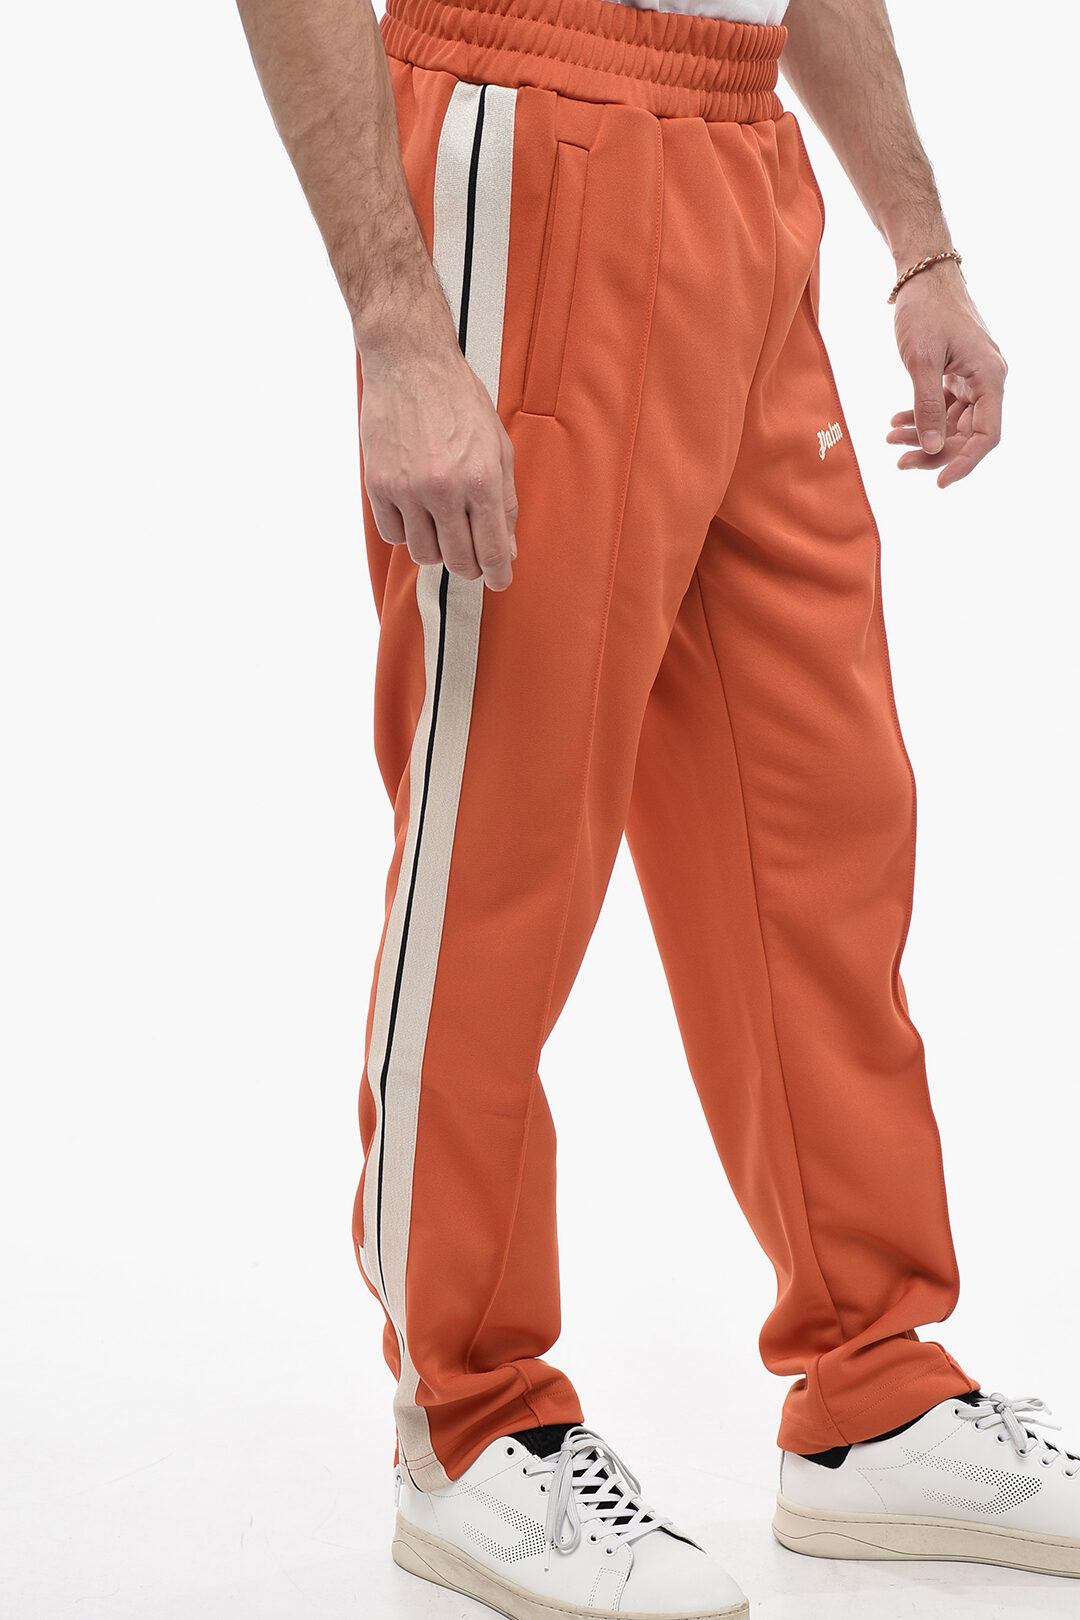 Domyos Mens Track Pants Price Starting From Rs 150/Pc. Find Verified  Sellers in Ludhiana - JdMart